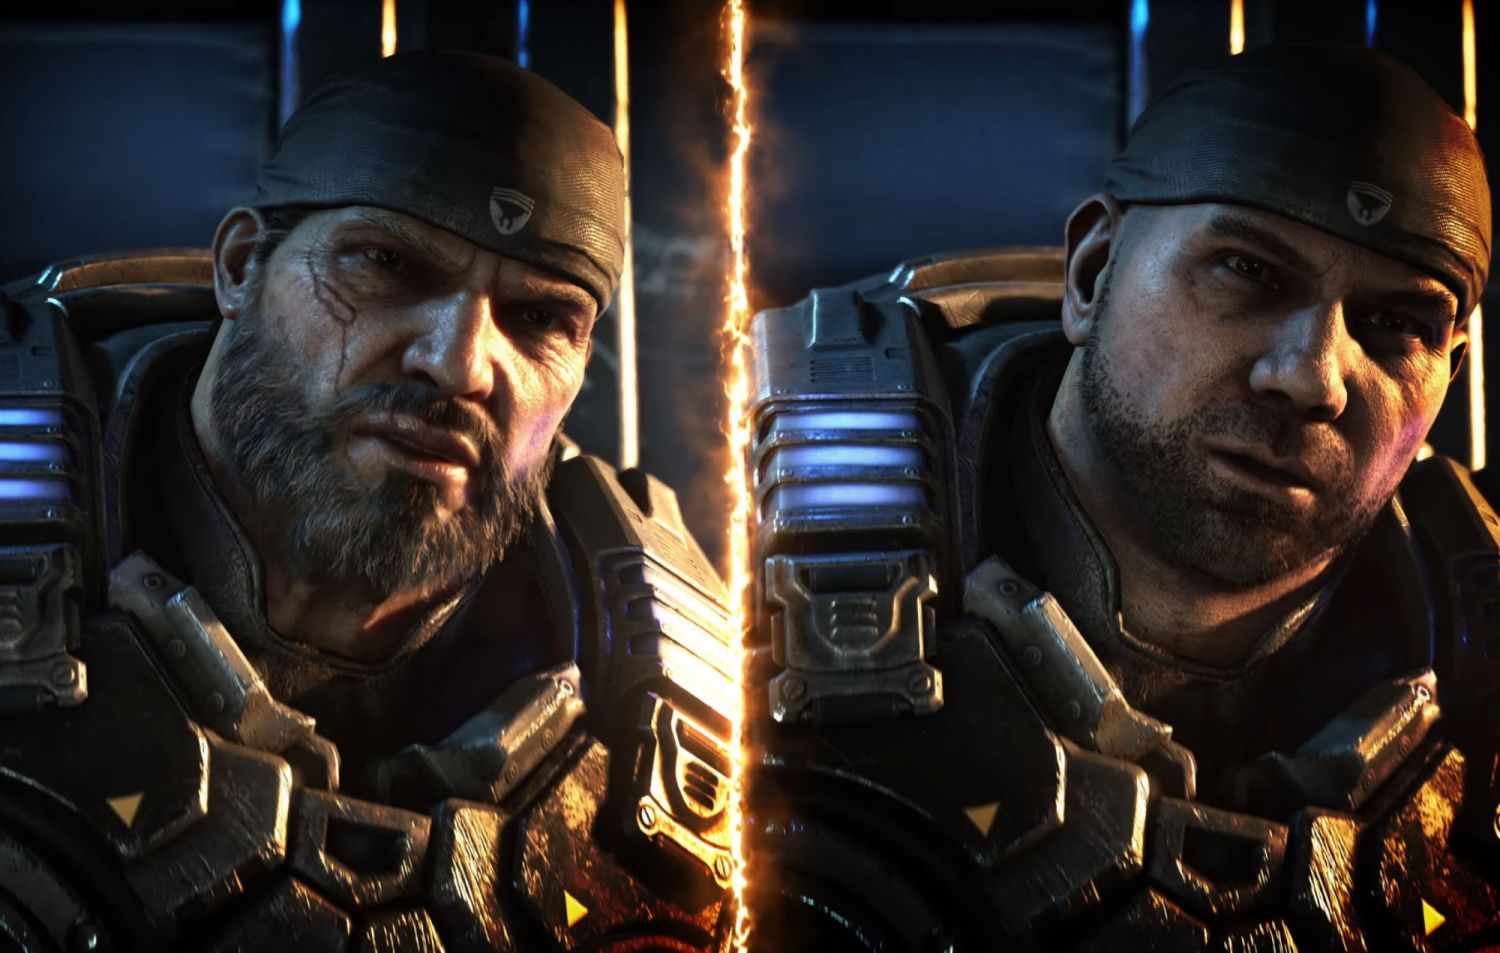 Gears 6 Should Feature Both Kait Diaz and Marcus Fenix as Playable